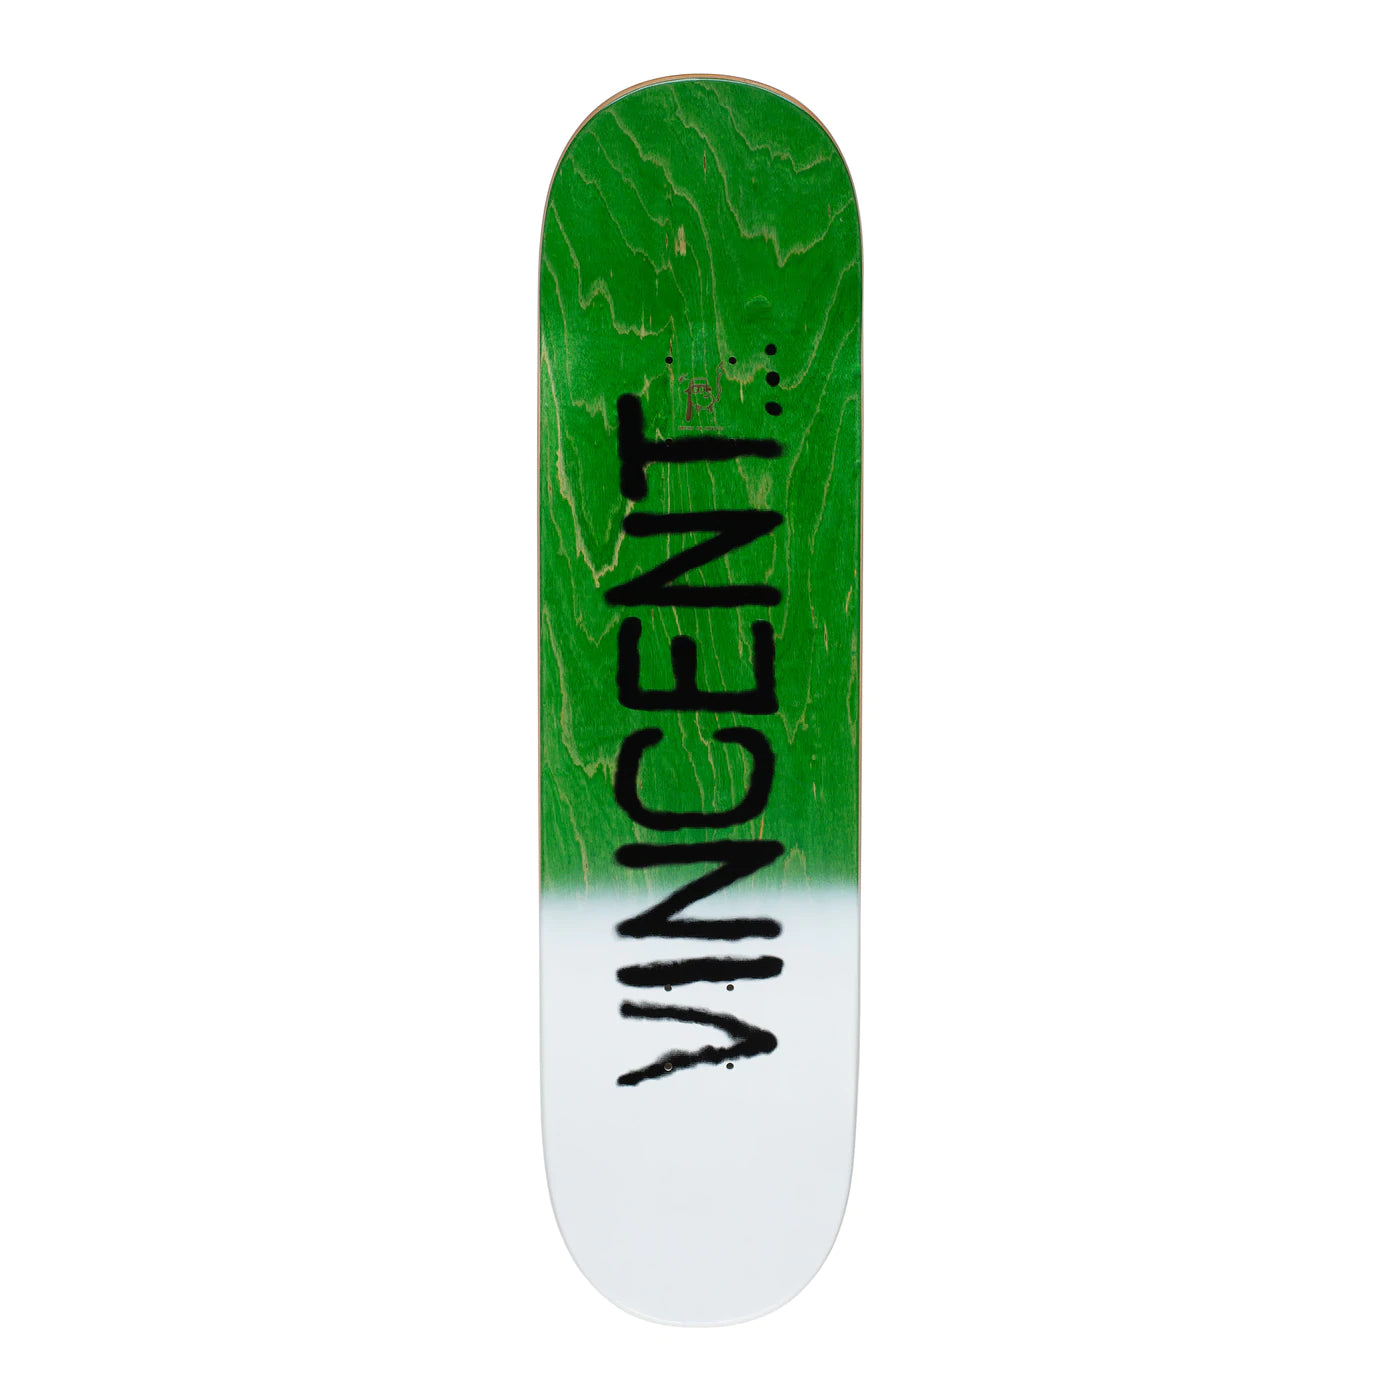 Fucking Awesome Vincent Touzery Predictions Skateboard Deck 8.0" - Apple Valley Emporium